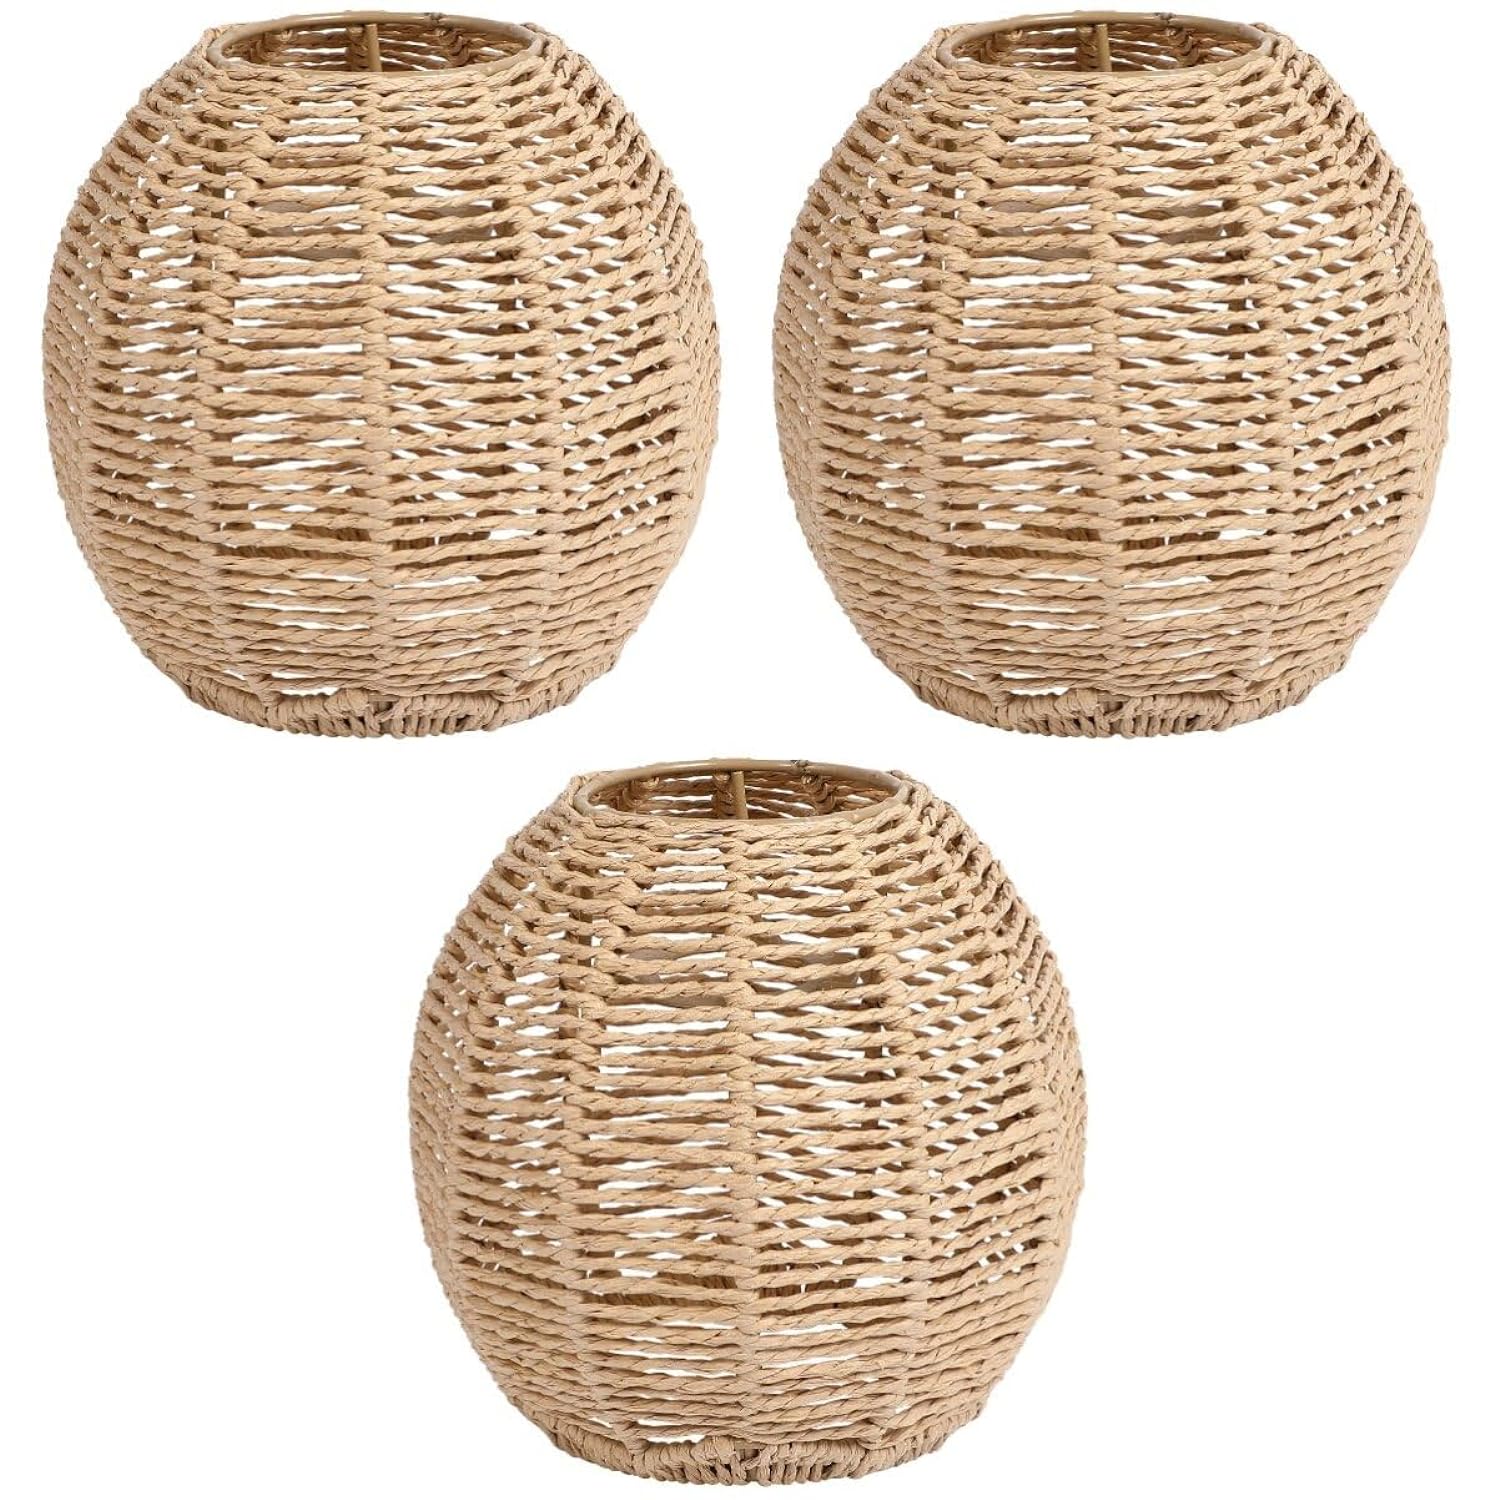 thinkstar 3Pc Retro Rattan Lamp Shade - Rustic Woven Small Lamp Shades - Lamp Shade Replacement For Pendant Light, Hanging Light, …